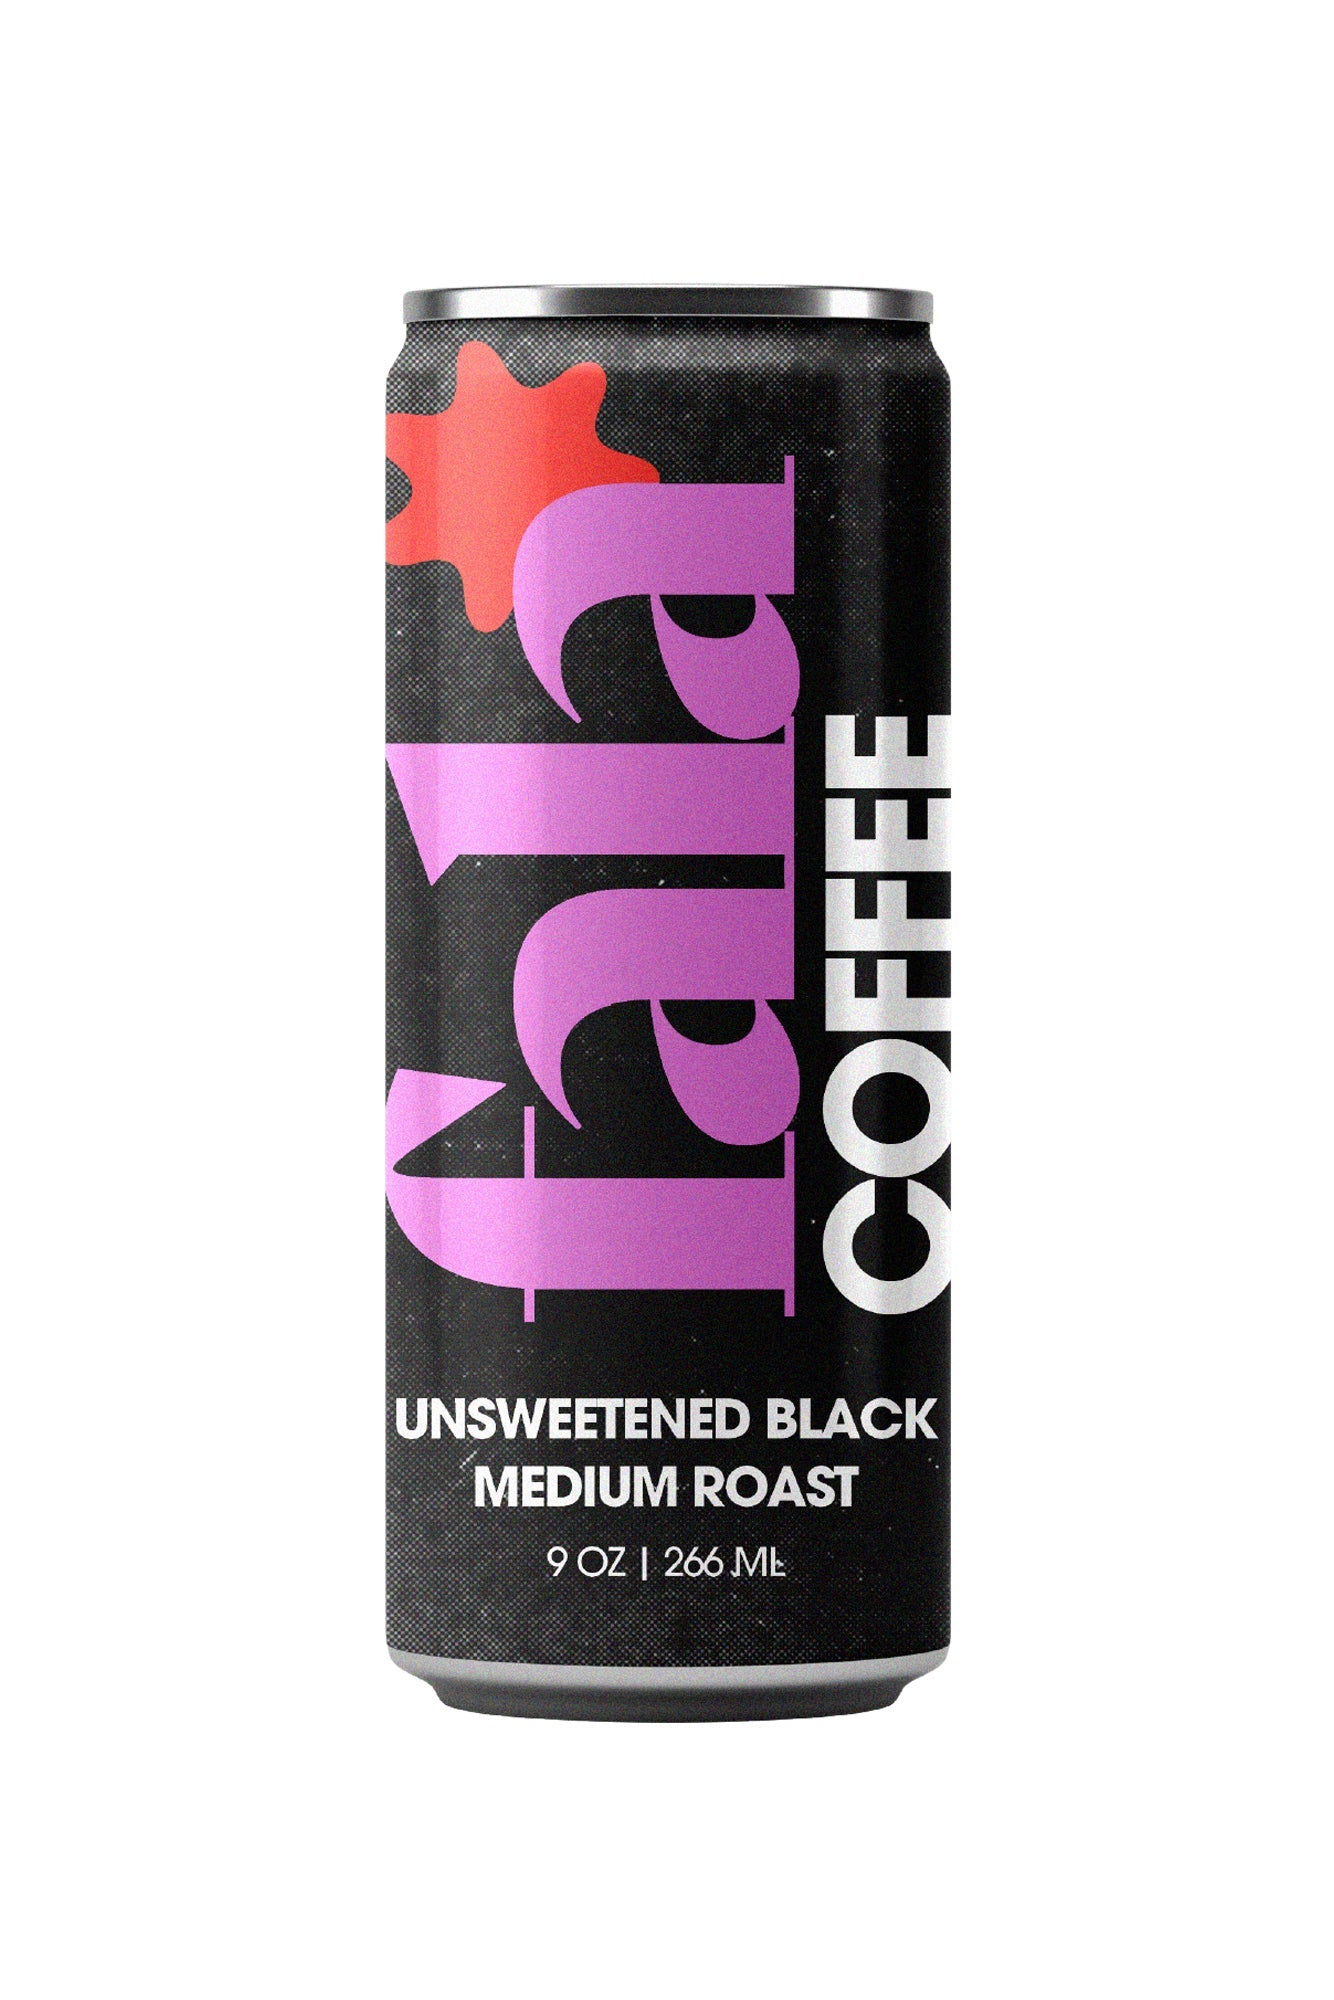 $3.50 per can / 12-pack Unsweetened Black Iced Coffee (NYC Delivery Pilot) - Fala Coffee